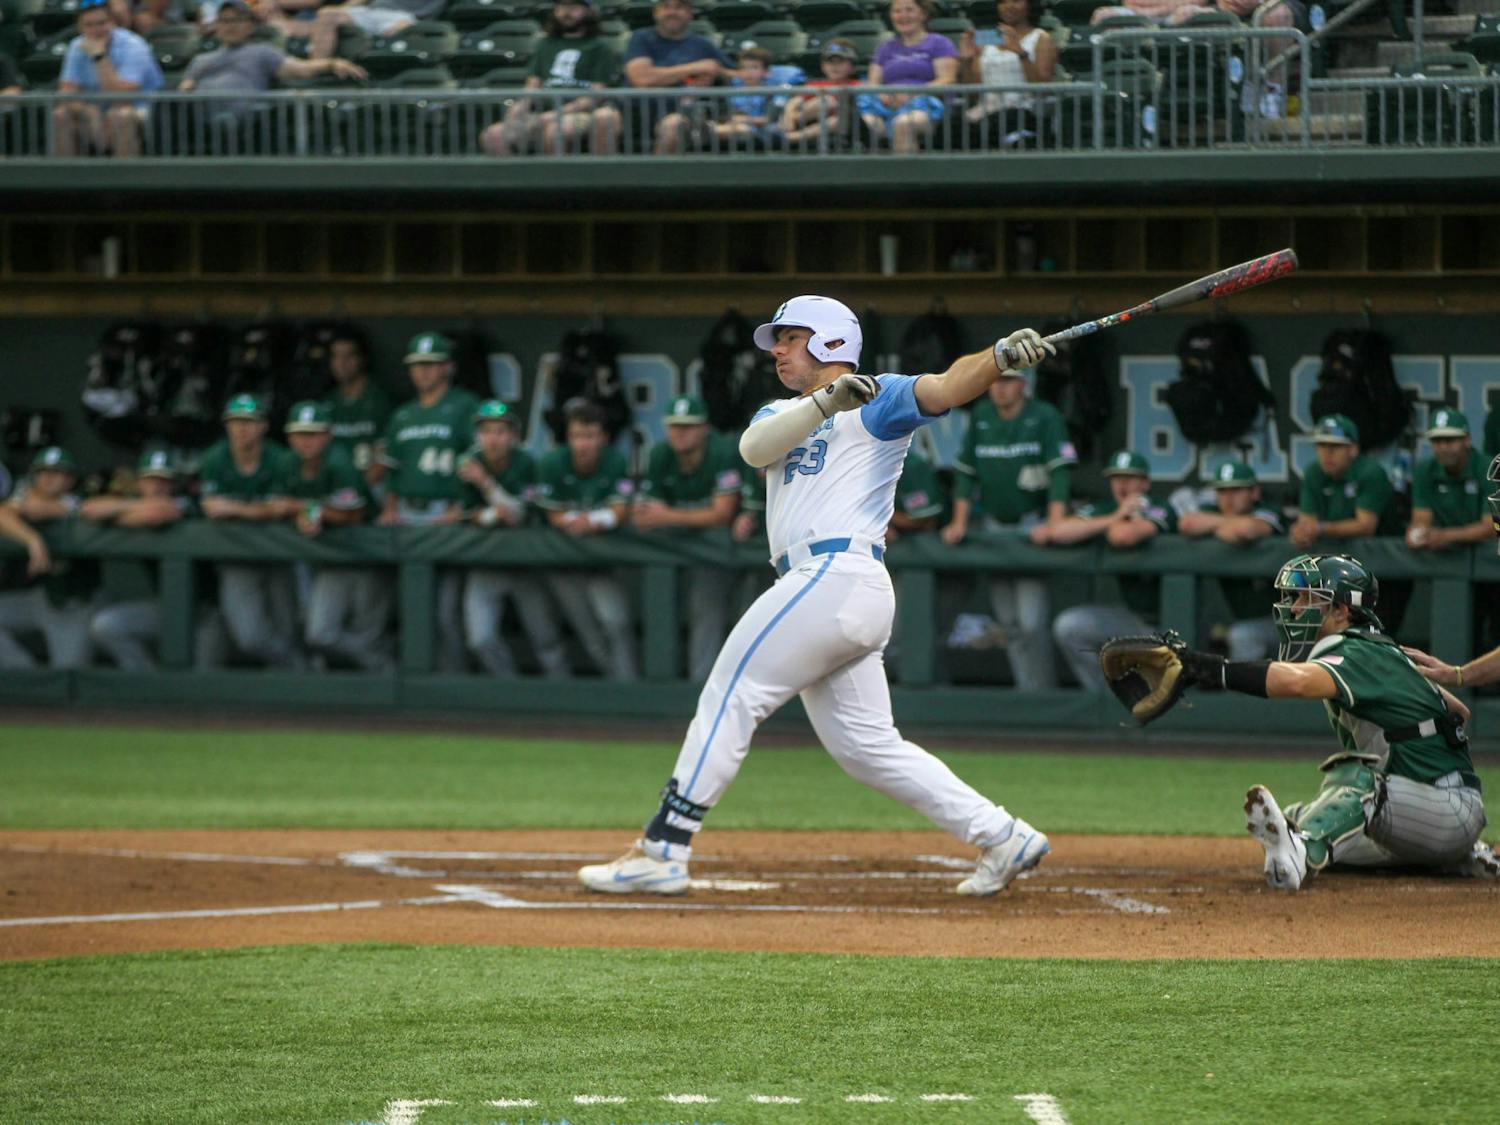 UNC sophomore first basemen and designated hitter Alberto Osuna (23) hits the ball during the baseball game against Charlotte on Tues. May 3, 2022 at Boshamer Stadium. UNC beat Charlotte 4-3.